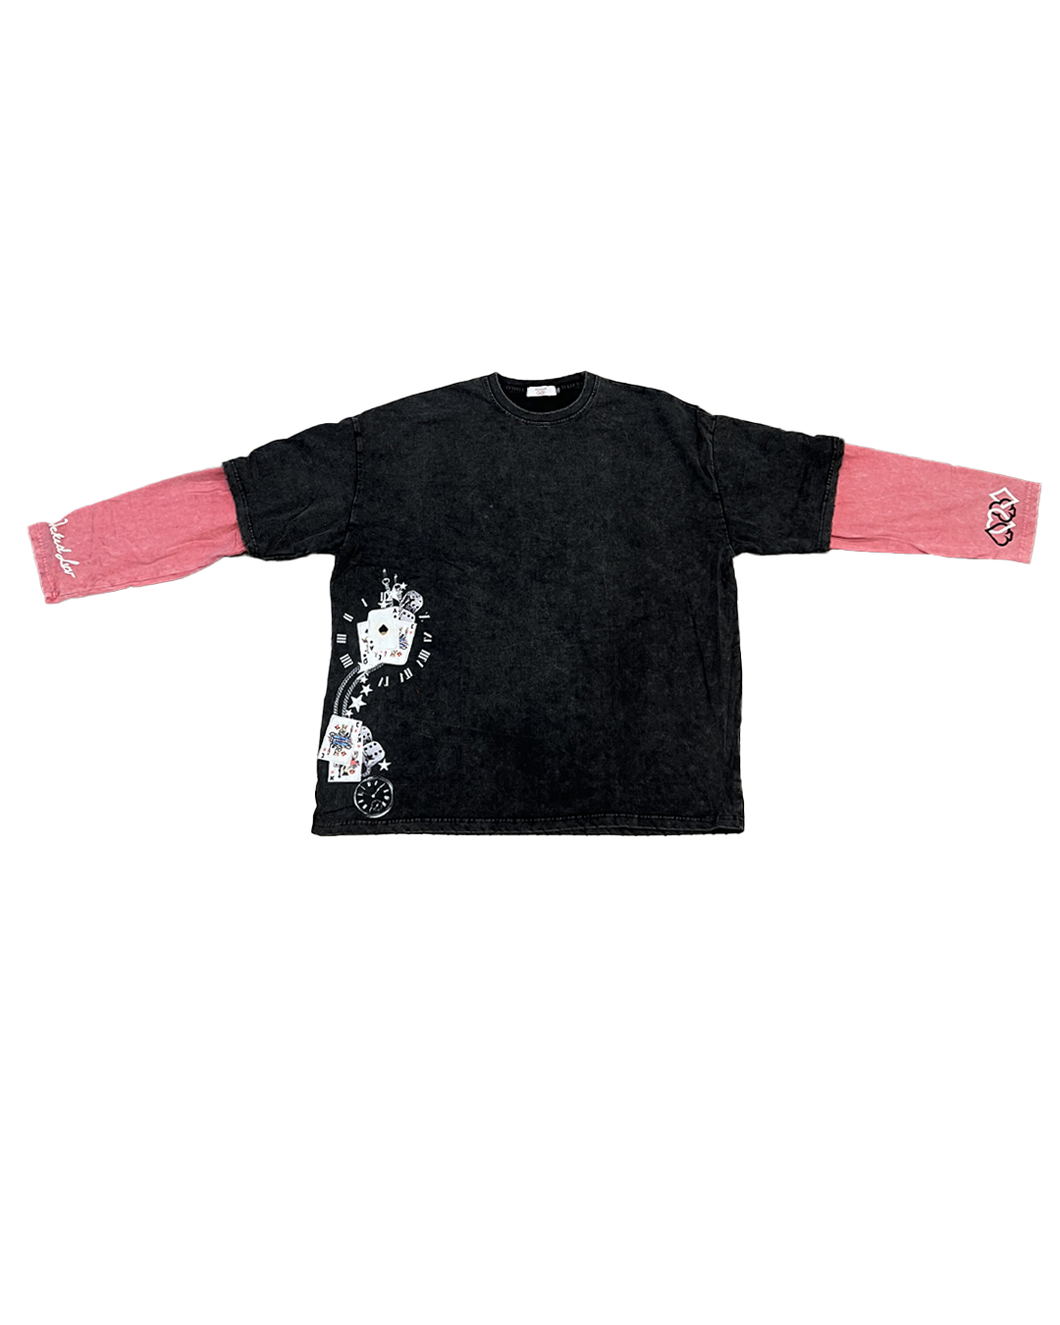 HANDS OF THE WICKED LONG SLEEVE (BLACK)